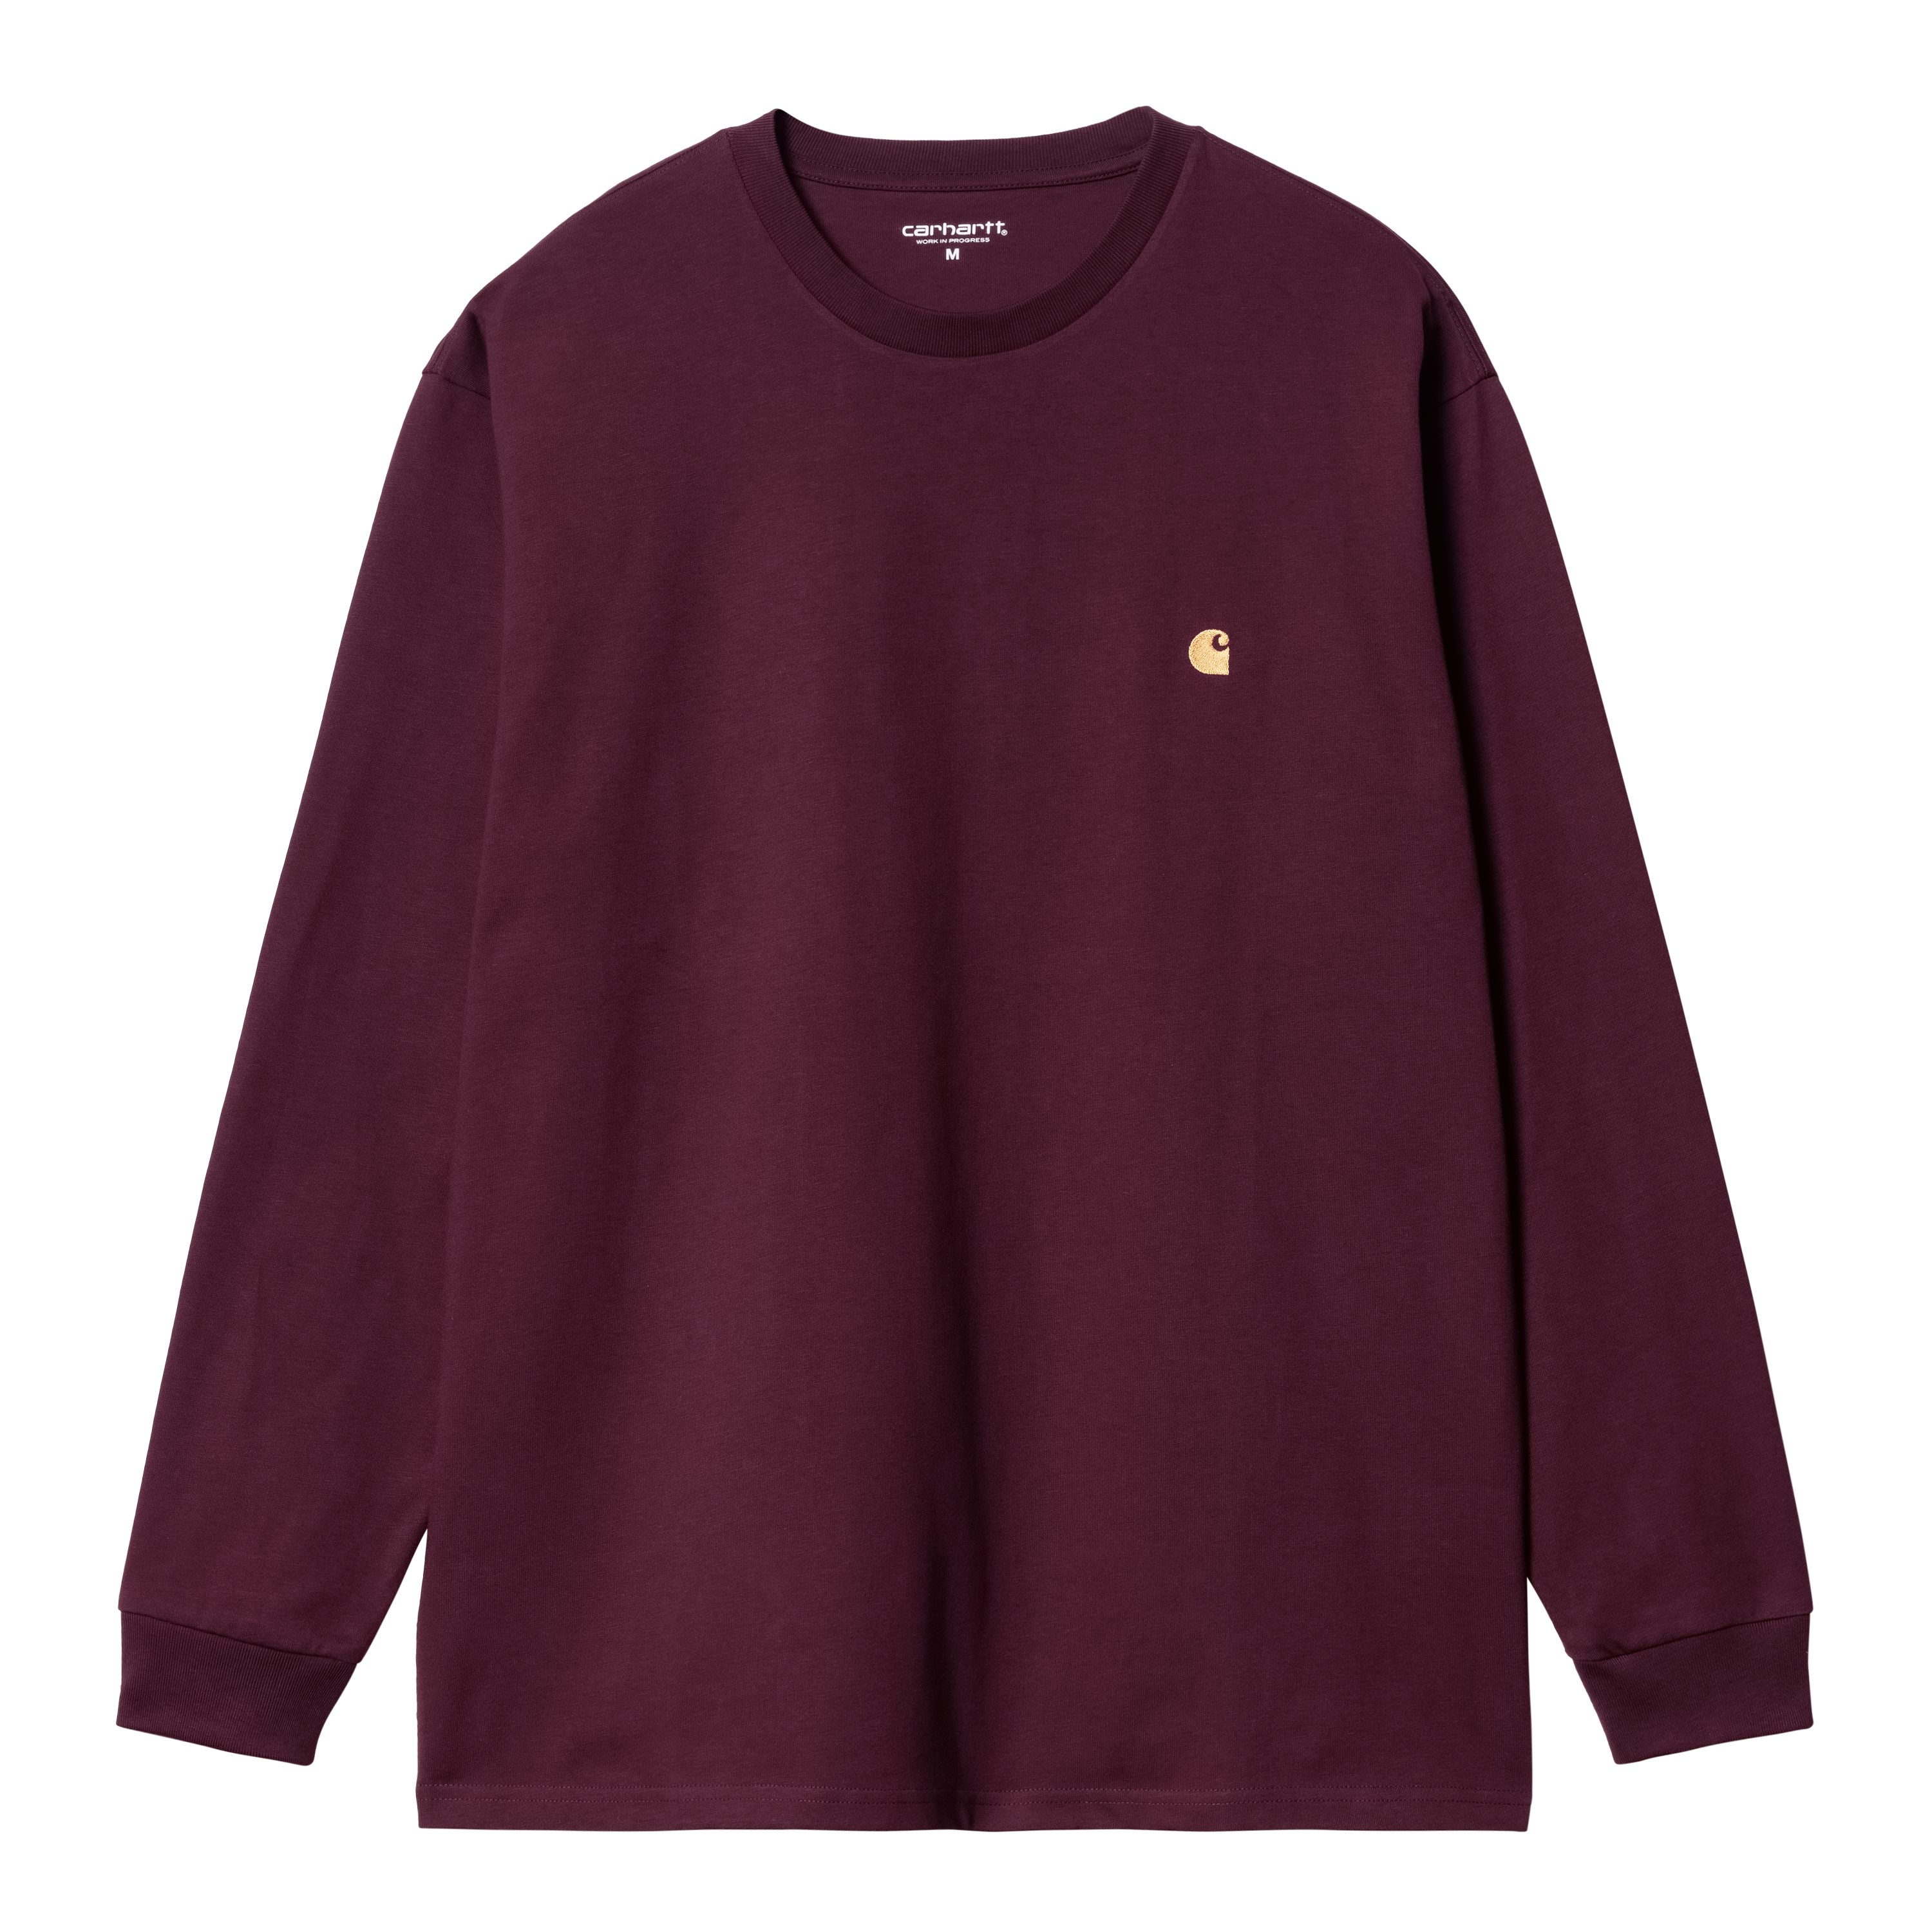 Carhartt WIP - L/S CHASE T-SHIRT - Amarone/Gold